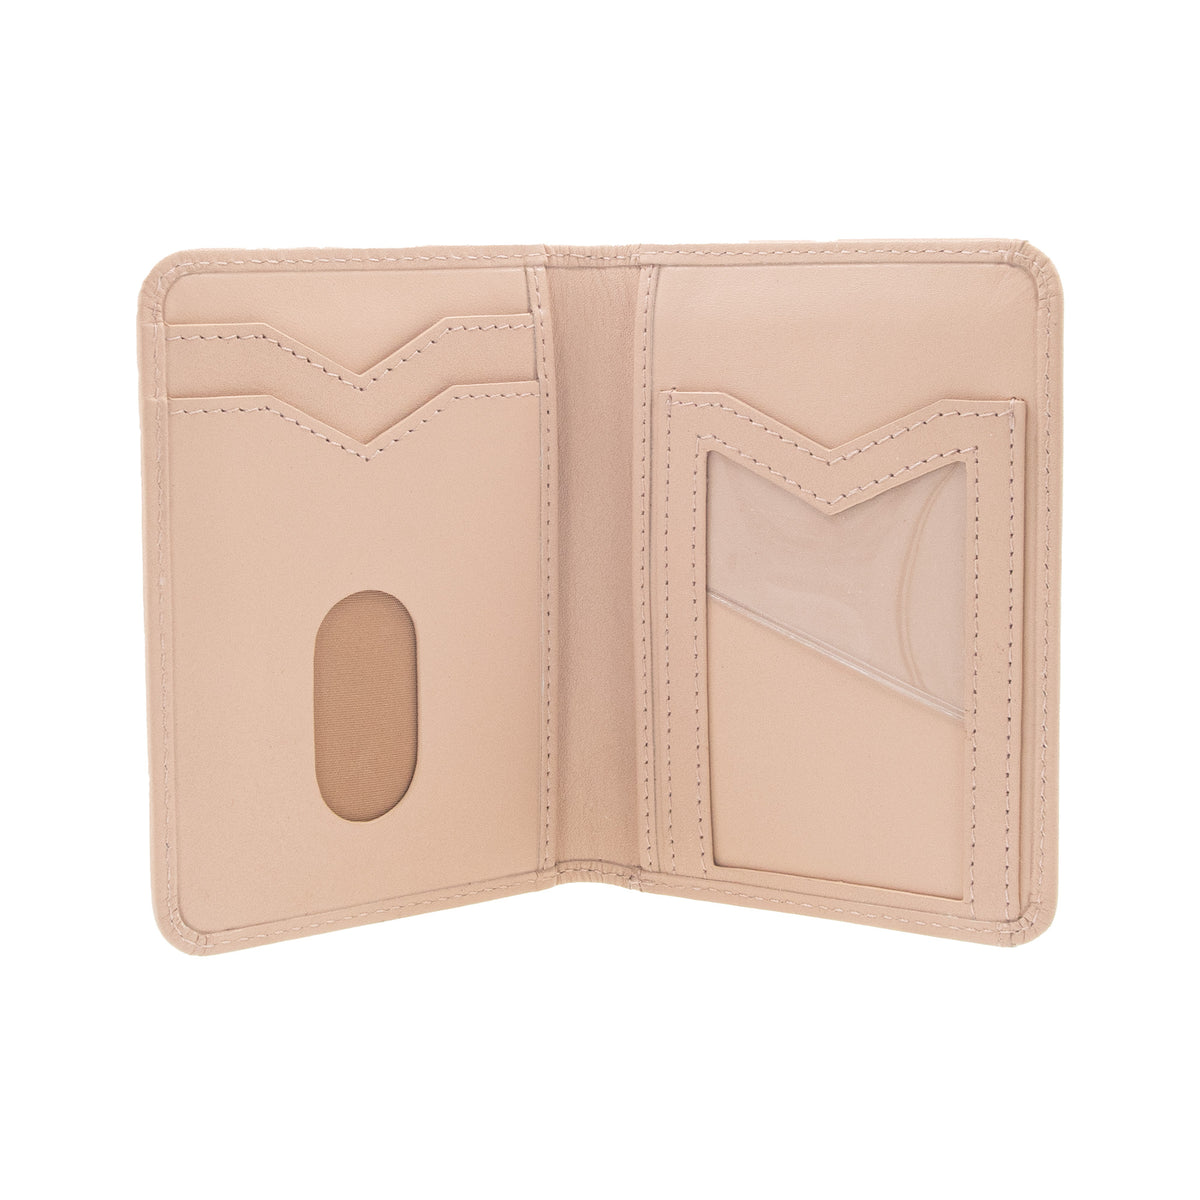 WI FOLD High-Performance Leather Wallet - Contactless and Biometric Payments - 9 Card Bifold - Layered RFID Protection - Minimalistic Credit Card Holder